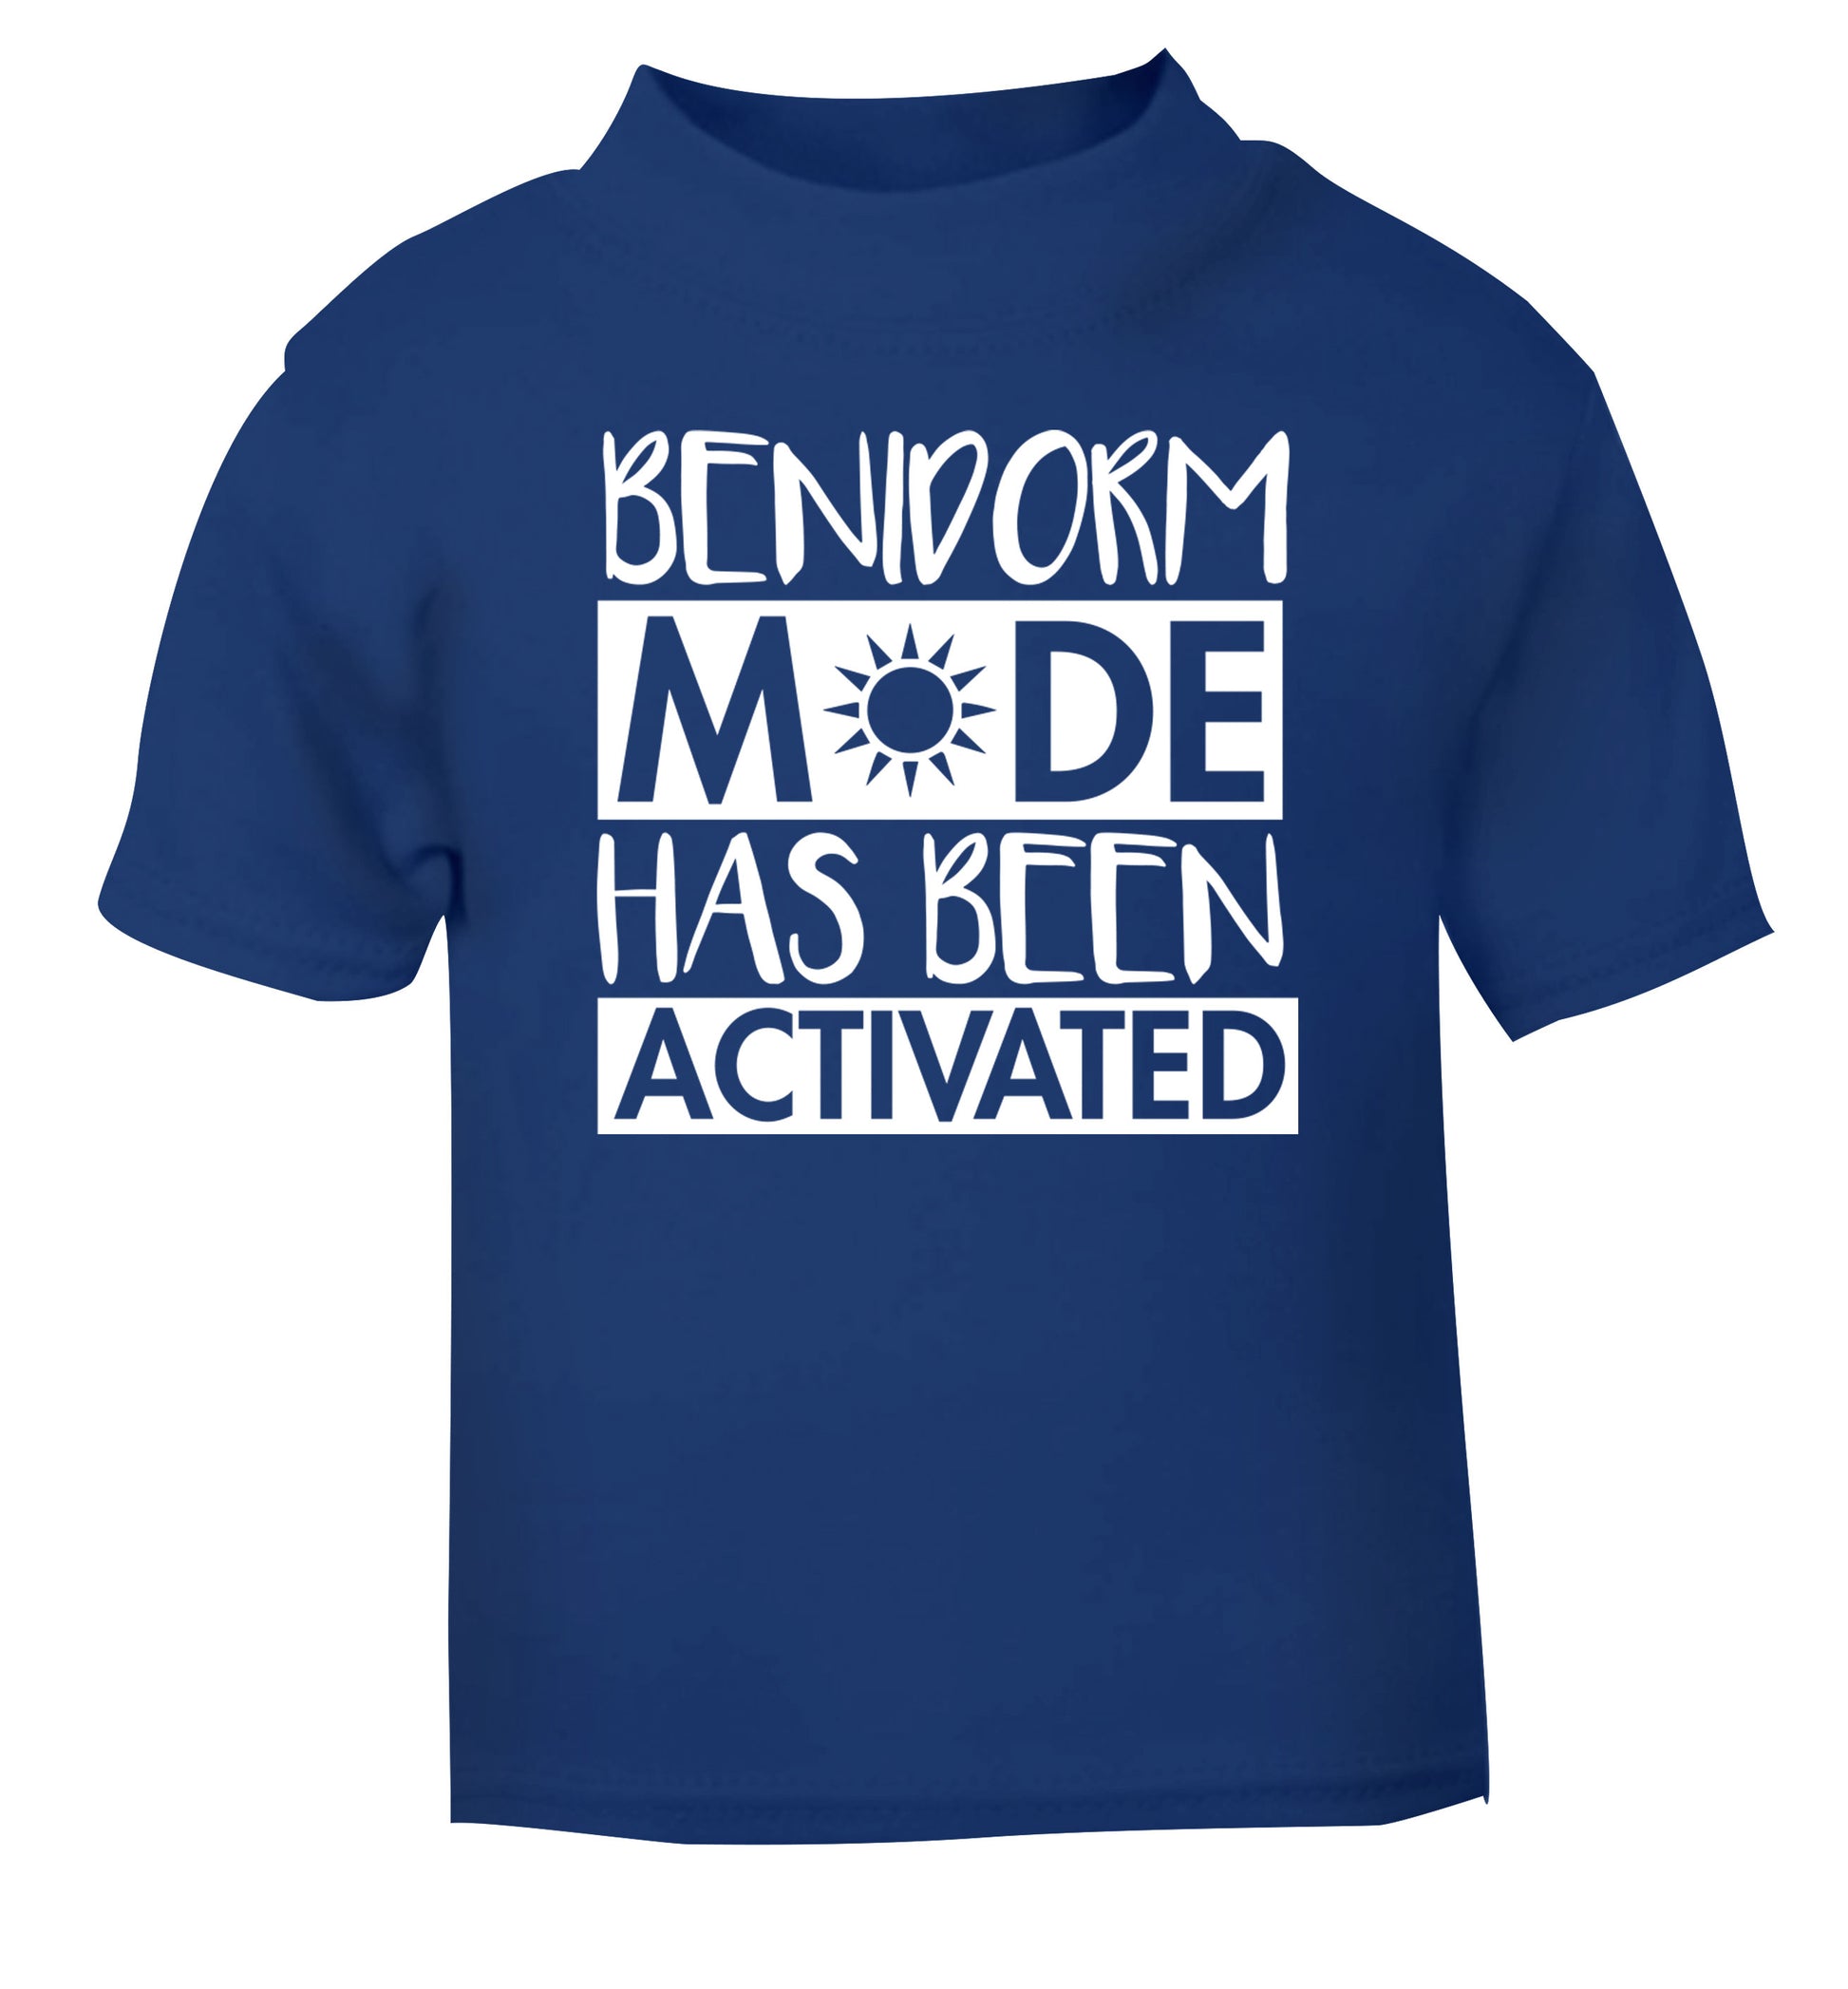 Benidorm mode has been activated blue Baby Toddler Tshirt 2 Years